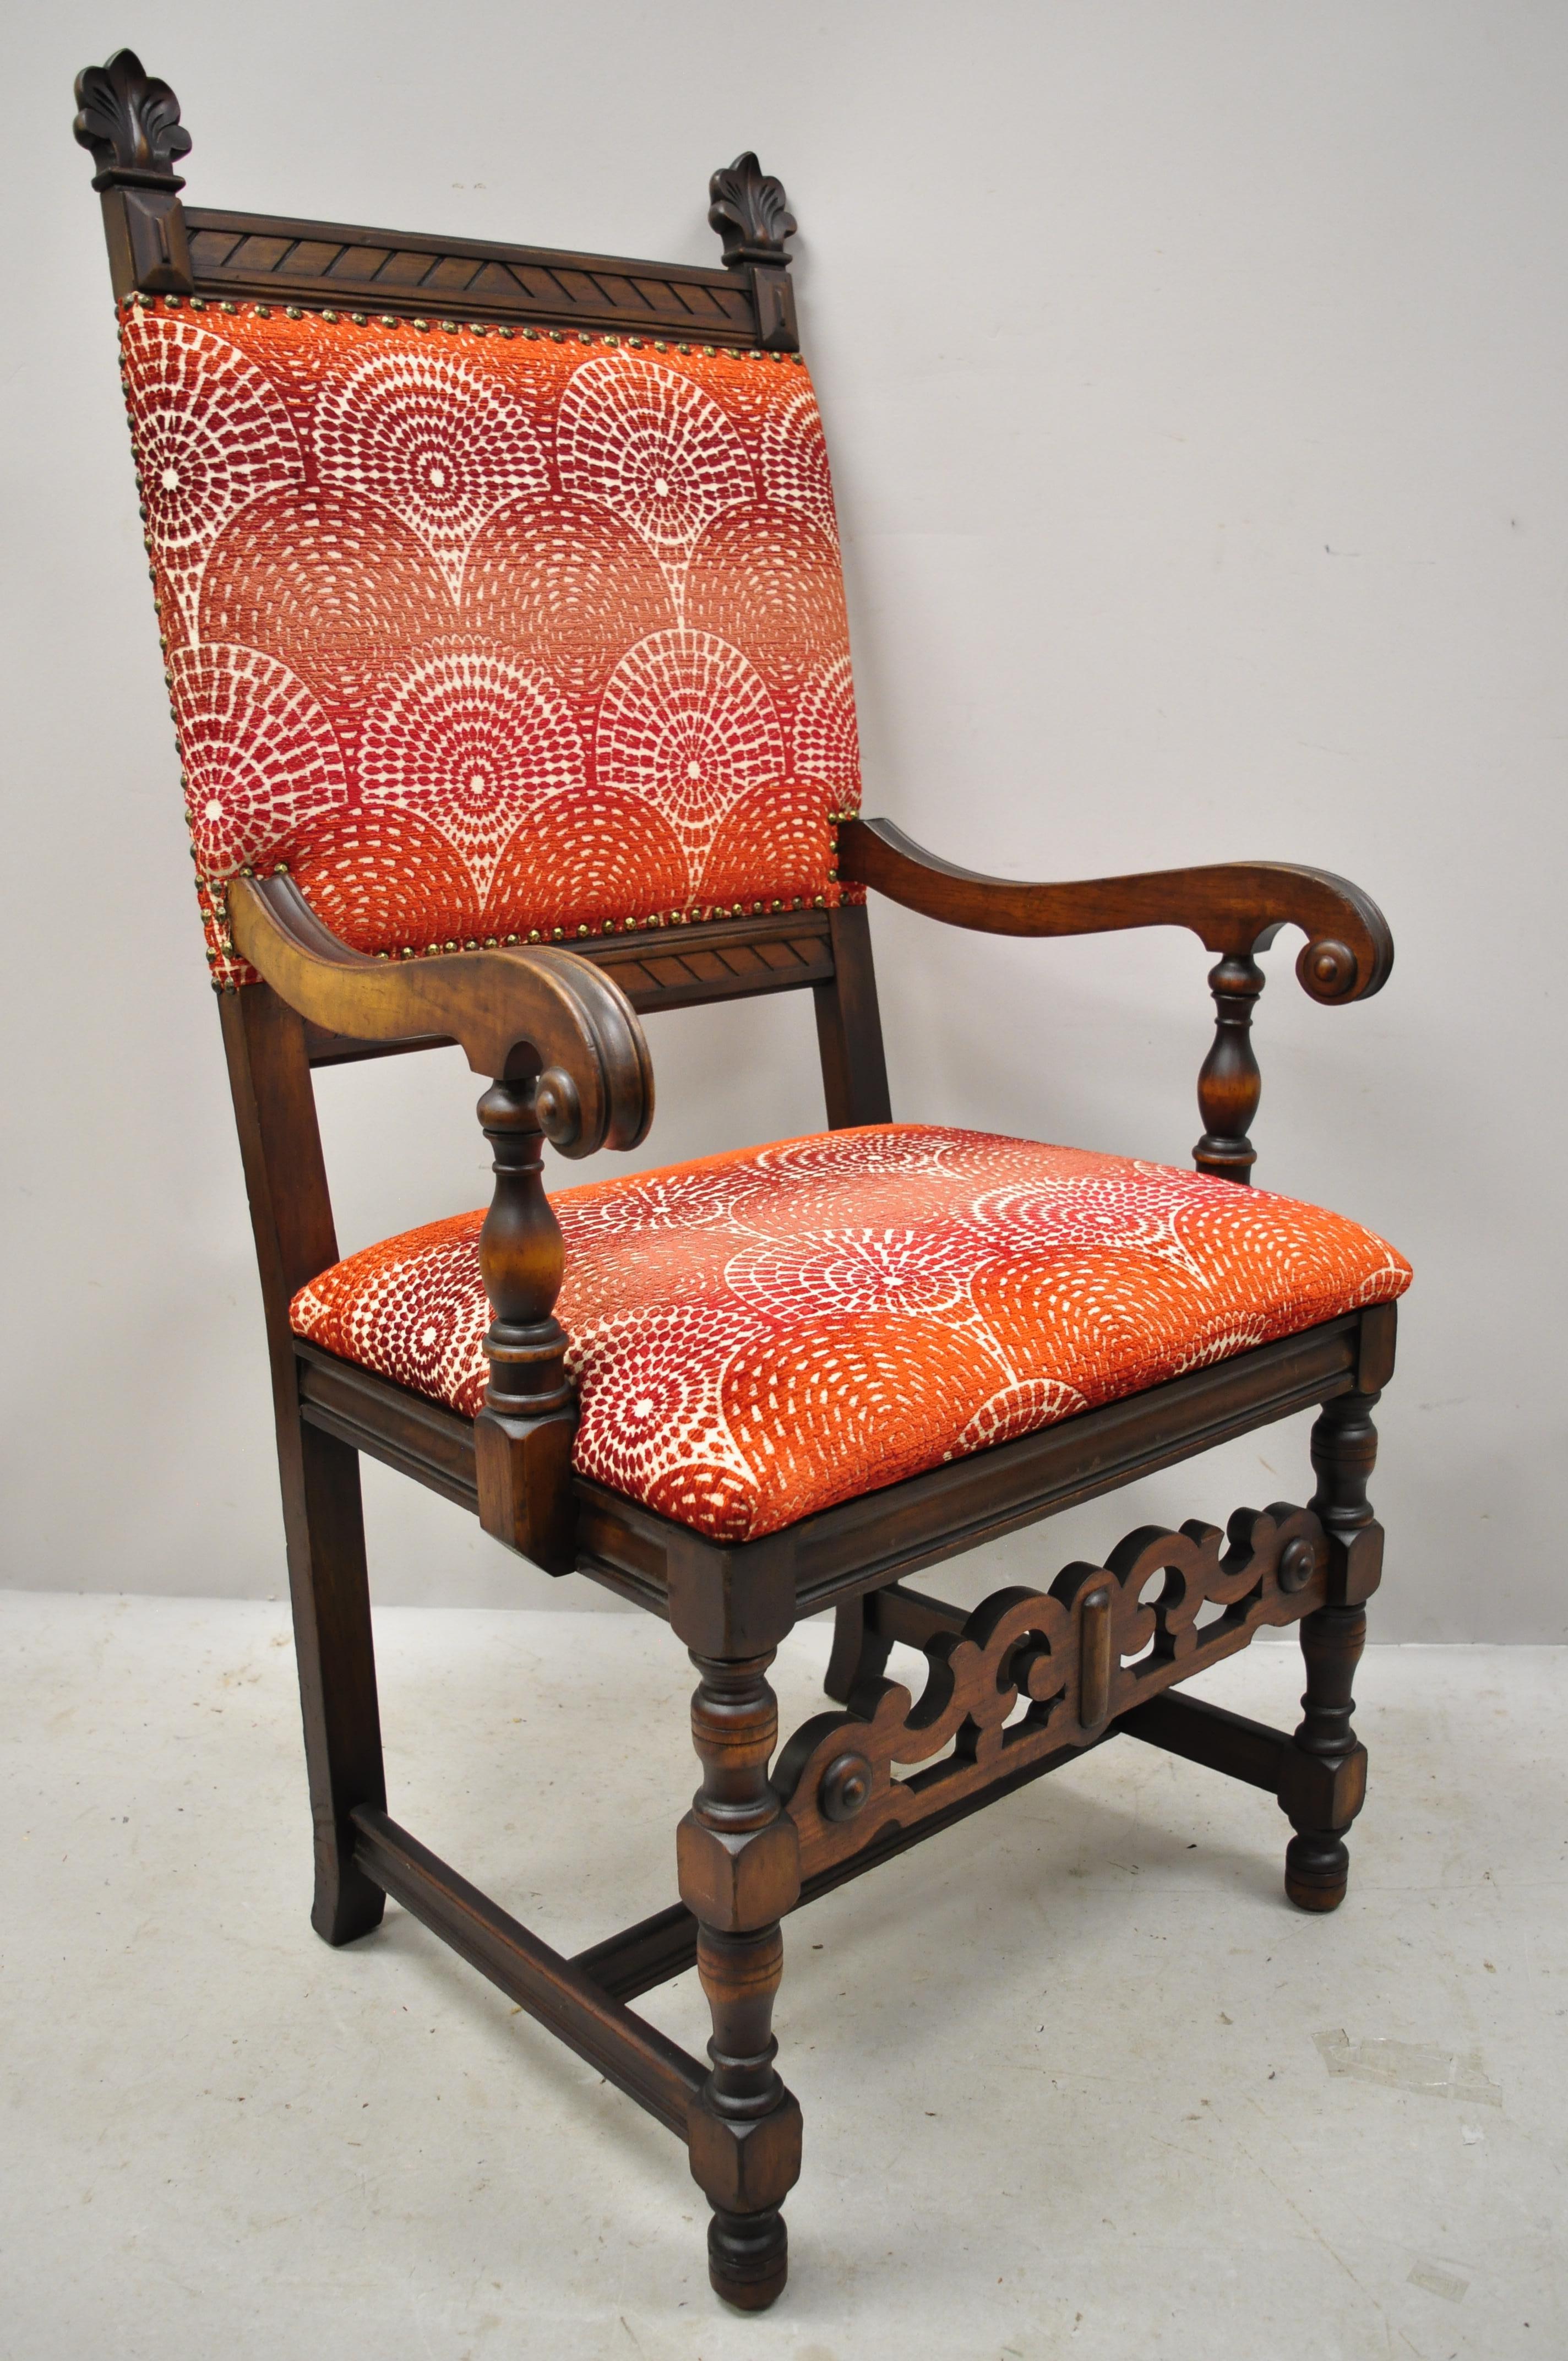 Antique Italian Renaissance Revival carved walnut throne captains armchair red fabric. Item features red spiral sunset print upholstery, solid wood frame, beautiful wood grain, nicely carved details, very nice antique item, circa early 20th century.